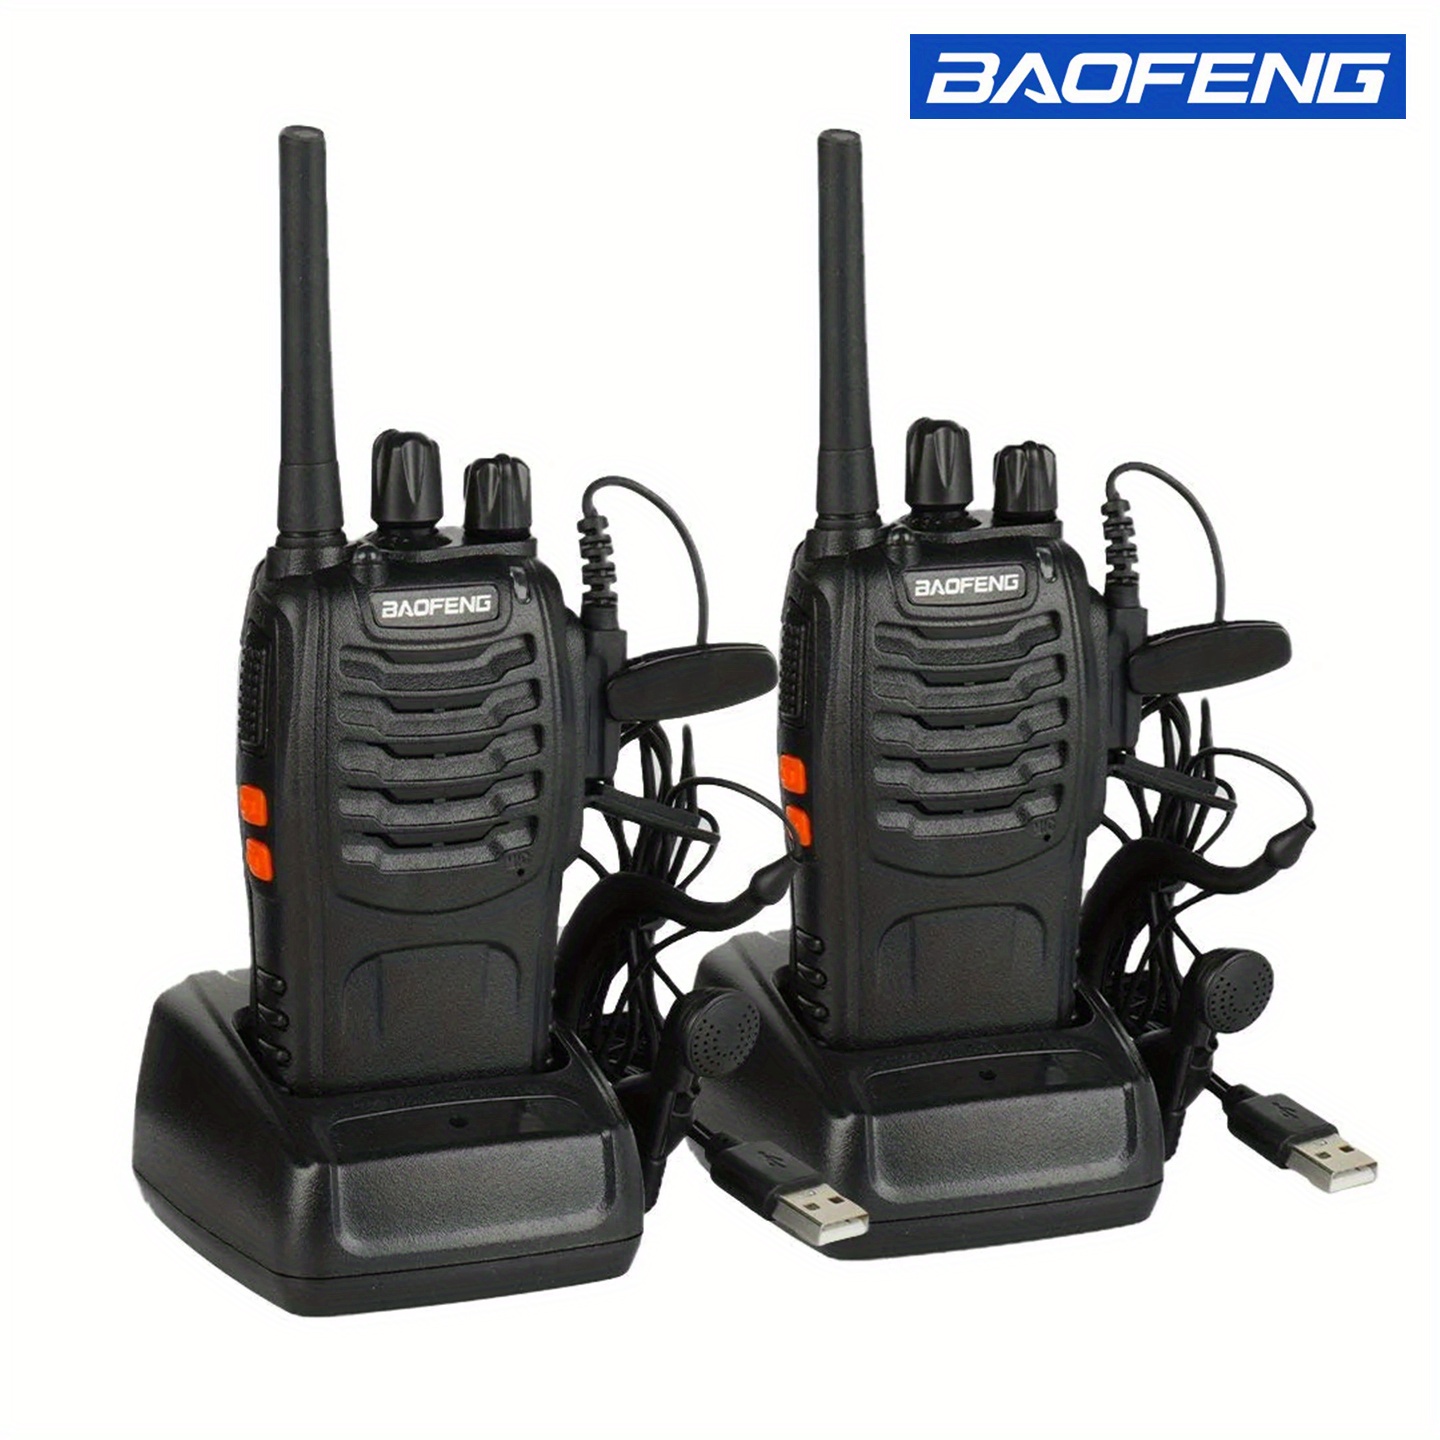 Ruyage UV3D Air Band Bf 888s Walkie Talkie Amateur Ham Two Way Radio  Station With UHF VHF, 200CH Full Band HT, NOAA Channel, AM Satcom G230518  From Georgee_store, $22.65